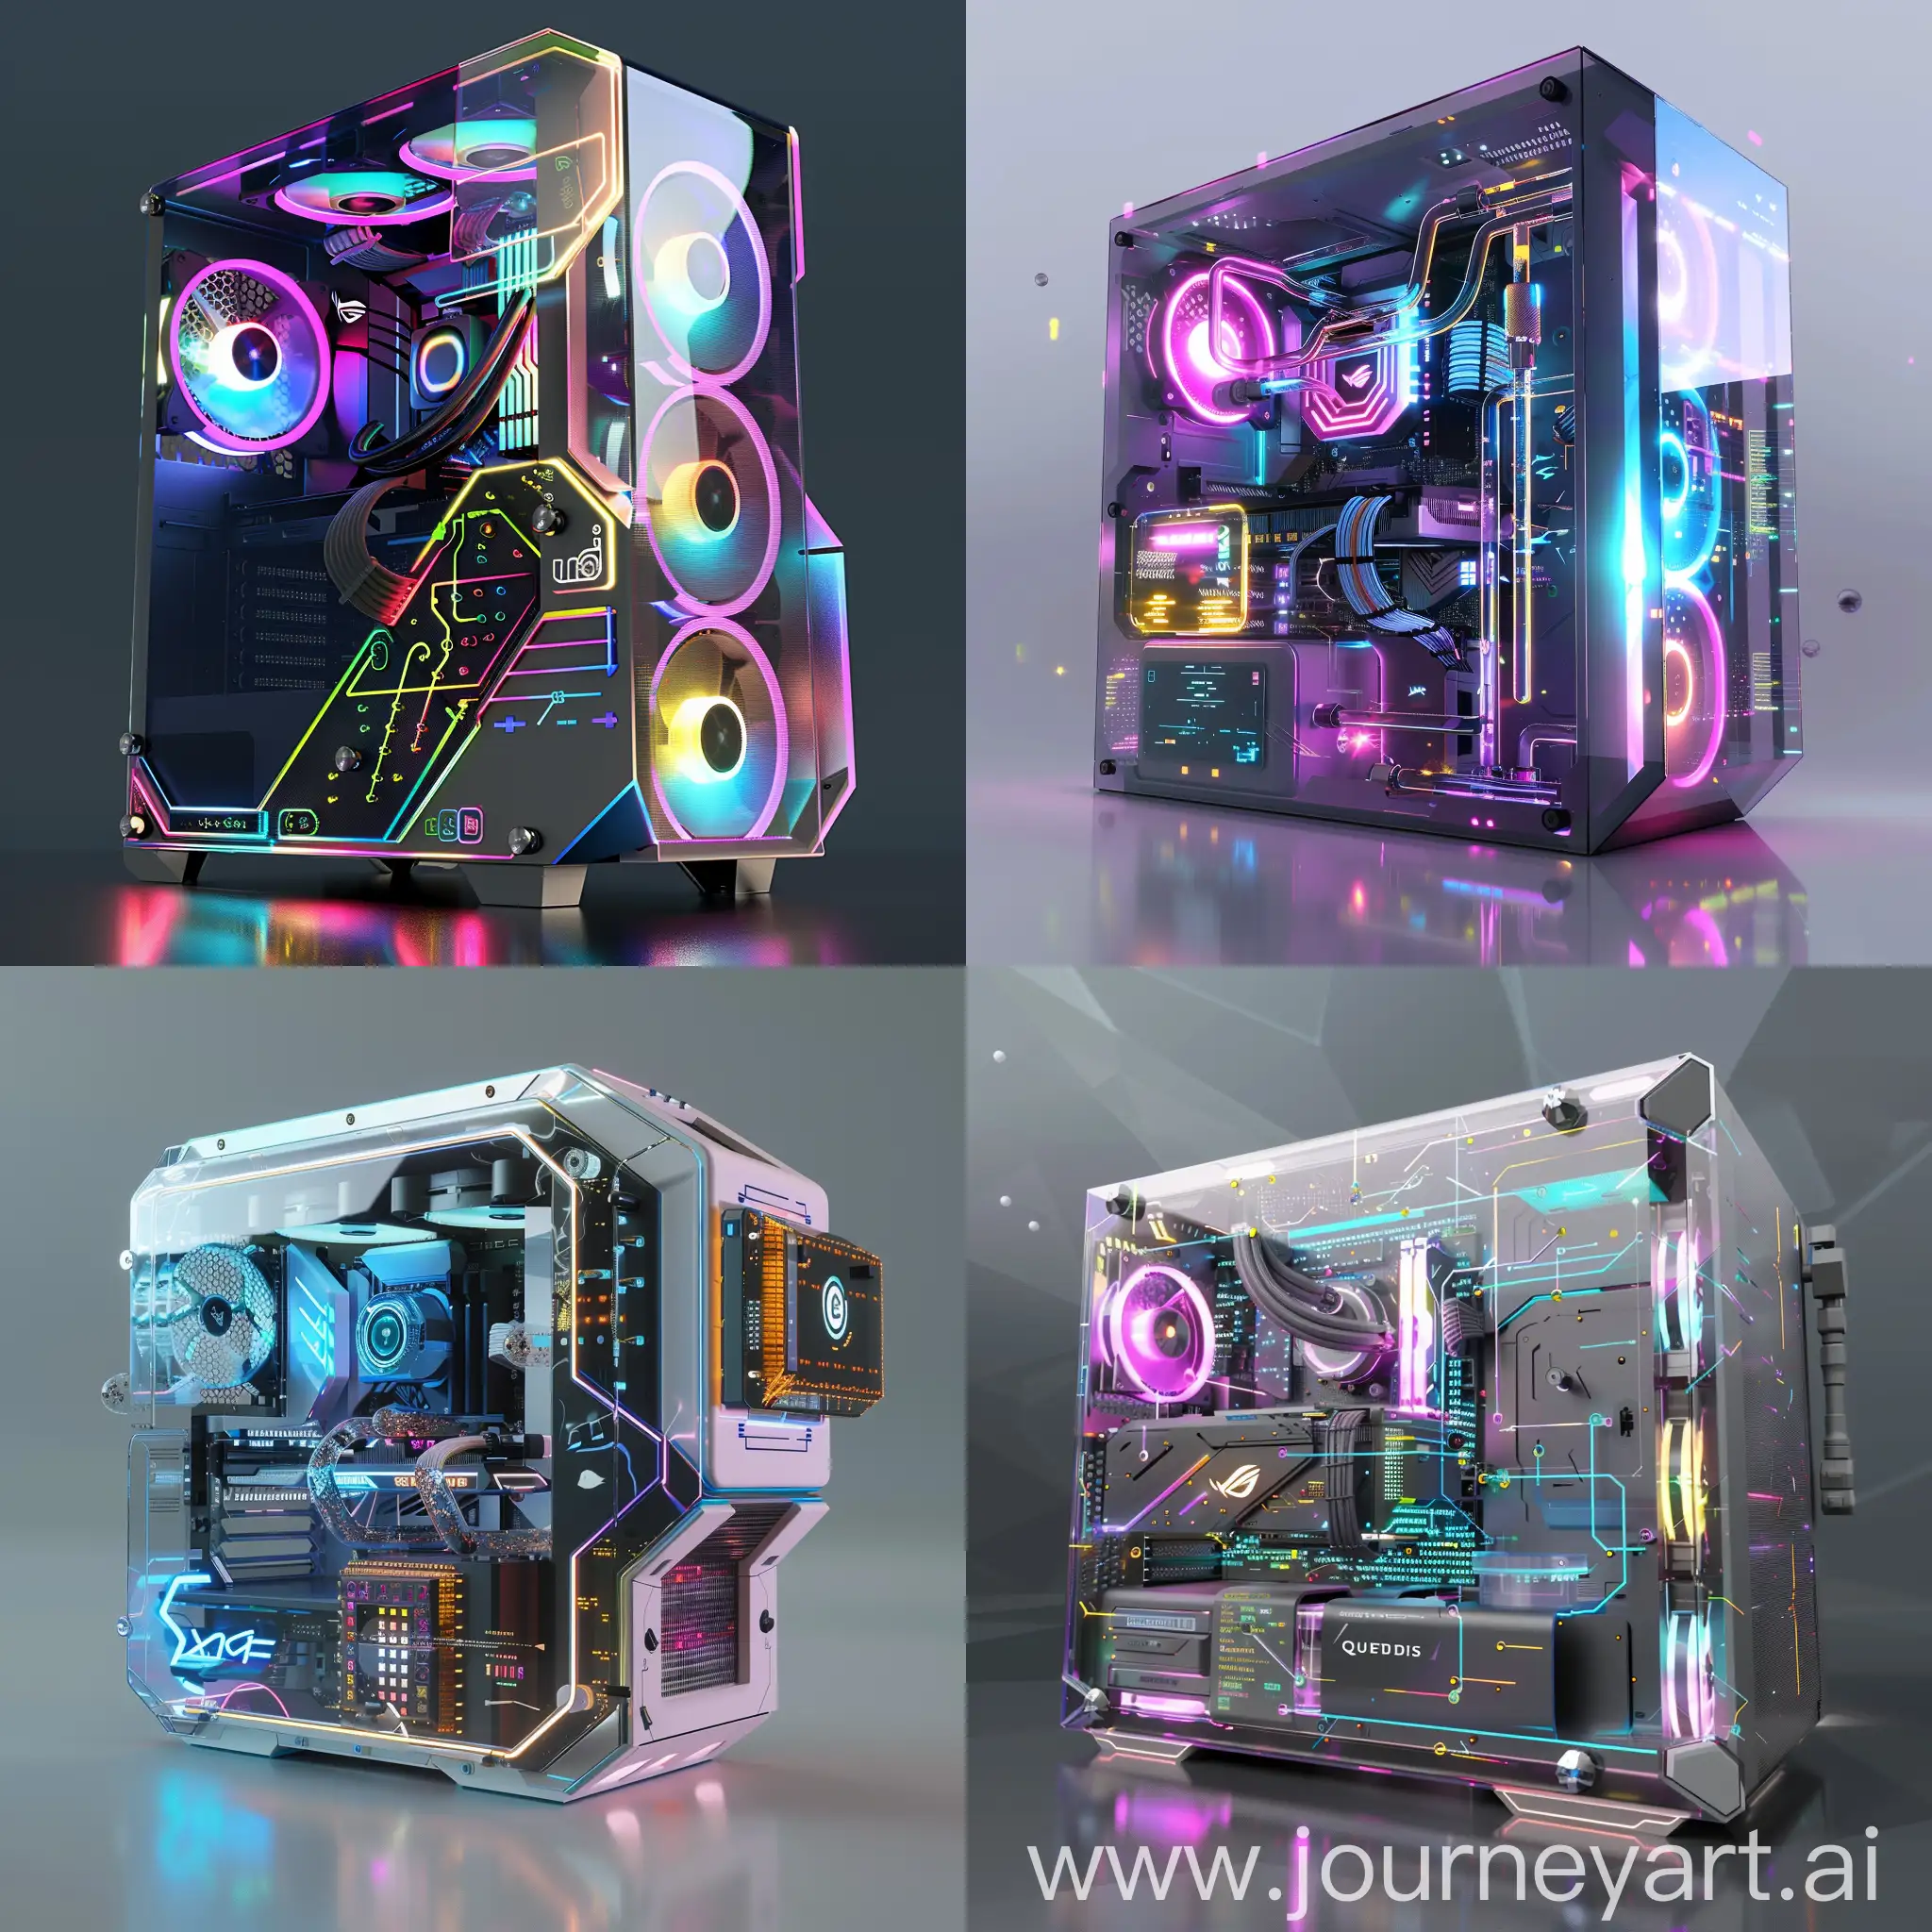 High-tech futuristic PC case, Modular Design, Liquid Cooling System, Integrated RGB Lighting, Wireless Charging Pad, Advanced Cable Management, Transparent Panels, Tool-Free Component Installation, Noise Reduction Technology, High-Speed Connectivity, Integrated AI Assistant, Nanomaterial Construction, Self-Healing Surfaces, Nanochips for Component Control, Molecular-Scale Cooling Channels, Nanoparticle Filter Systems, Nano-Coated Conductive Pathways, Quantum-Dot Display Integration, Nanogenerator Power Source, Molecular-Scale Data Storage, Nanorobotics Maintenance Systems, Aerodynamic Design, RGB Lighting Integration, Tempered Glass Panels, Integrated Display Screens, Advanced Connectivity Ports, Customizable Exterior Panels, Embedded Wireless Charging, Motorized Component Doors, Reflective Surfaces, Holographic Projection System, Nano-Textured Finishes, Nanorod Antenna Array, Molecular-Scale Light Diffusion, Self-Assembling Panels, Nanoparticle-Based Color Shifting, Nanofiber Reinforced Structures, Quantum Dot Nanopixels, Molecular-Scale Sound Absorption, Nanocoated Solar Panels, Nanomachine Dynamic Sculpting, unreal engine 5 --stylize 1000